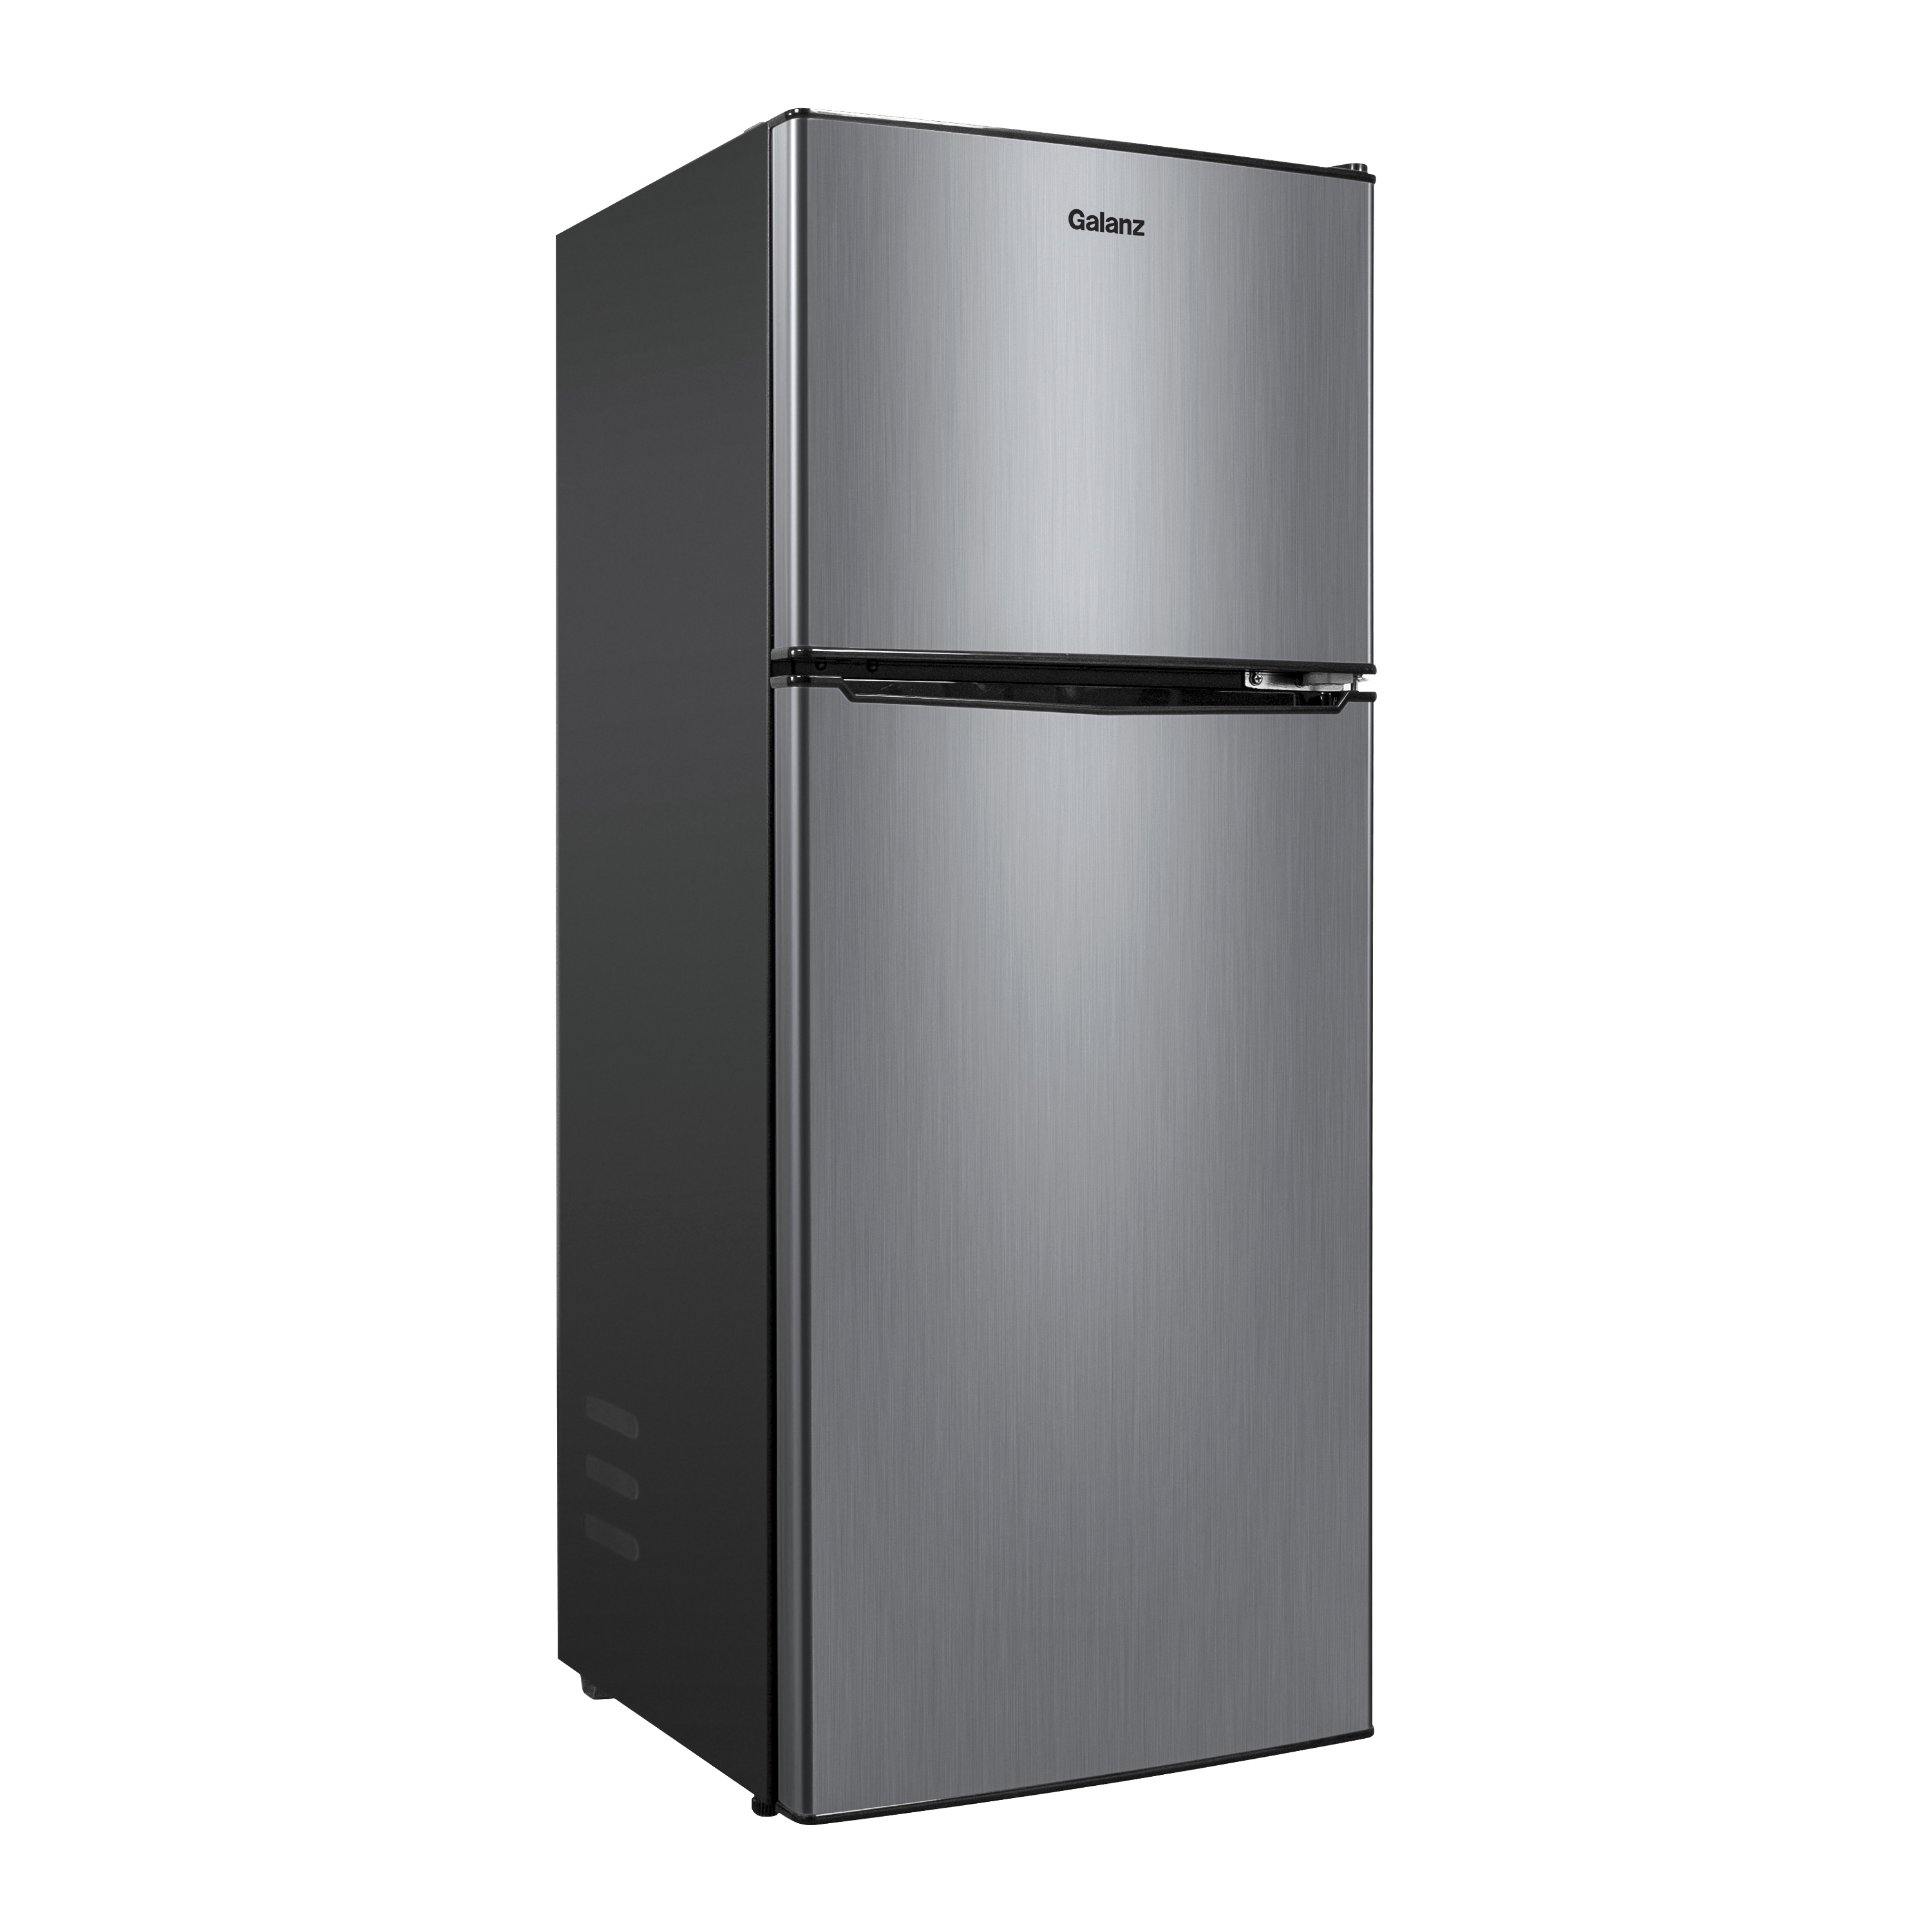 Galanz 4.6. Cu ft Two Door Mini Refrigerator with Freezer, Stainless Steel, New, Width 19.13" - image 3 of 11